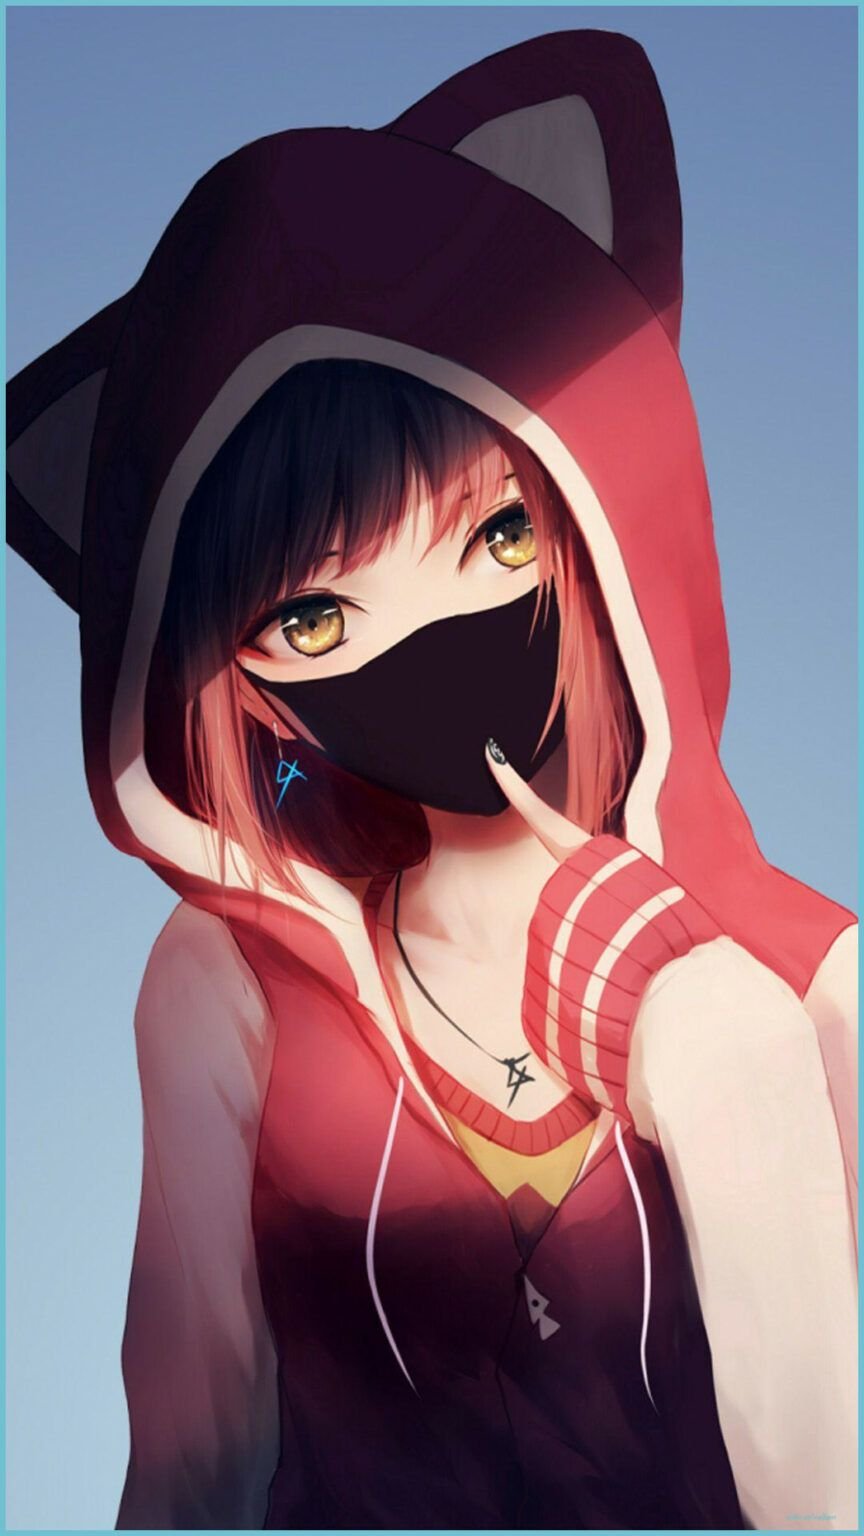 Anime Girl Mask wallpaper by Alexxandrum - Download on ZEDGE™ | 1b49